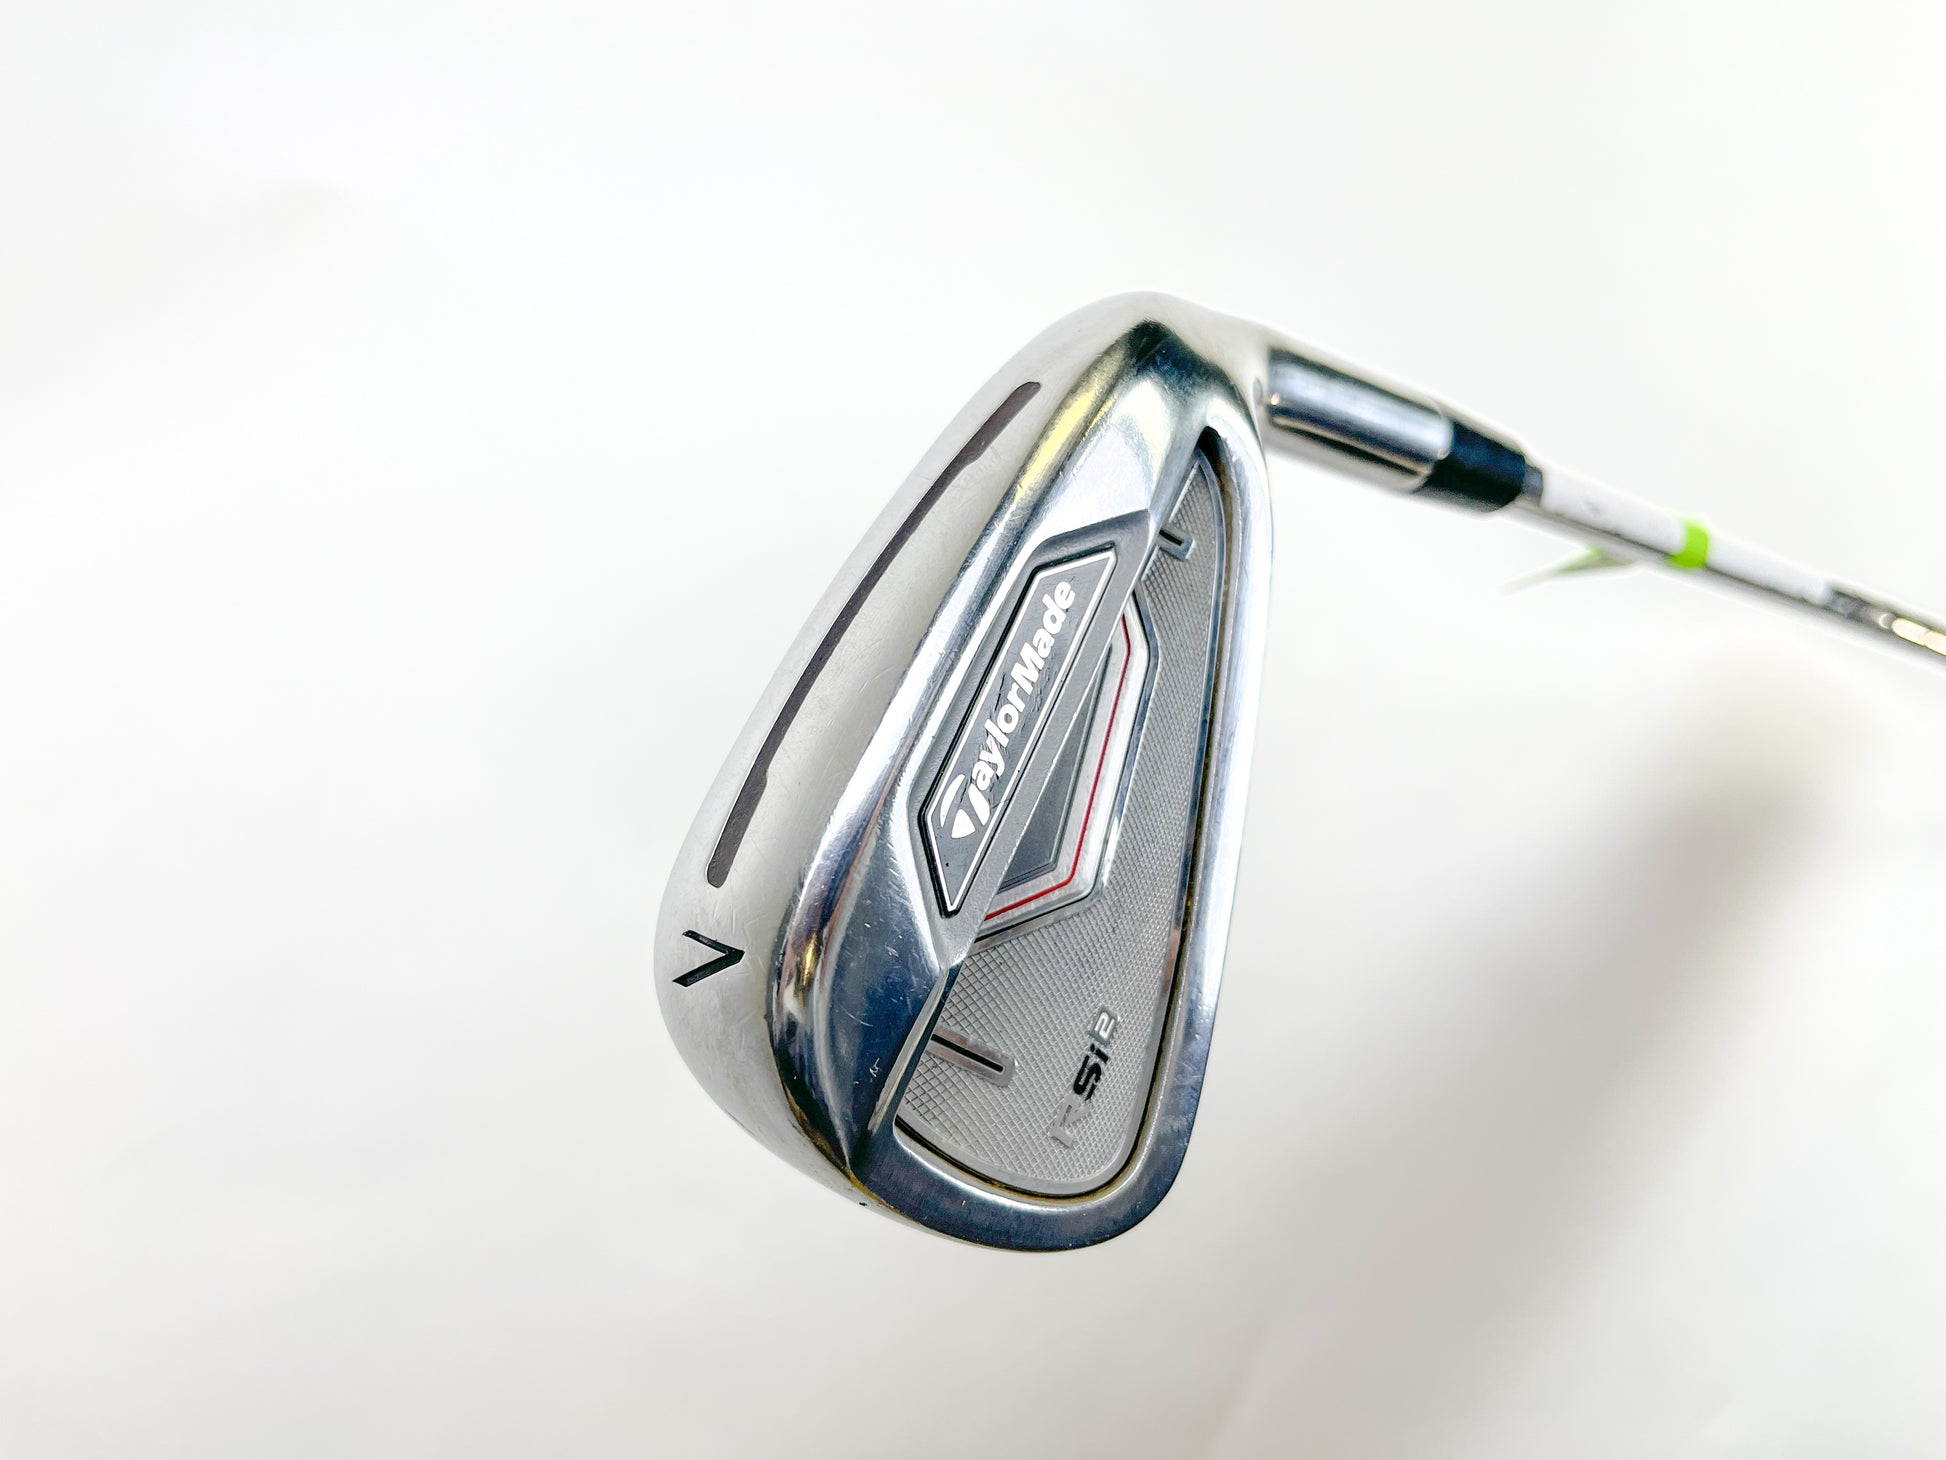 Used TaylorMade RSi 2 Single 7-Iron - Right-Handed - Regular Flex-Next Round